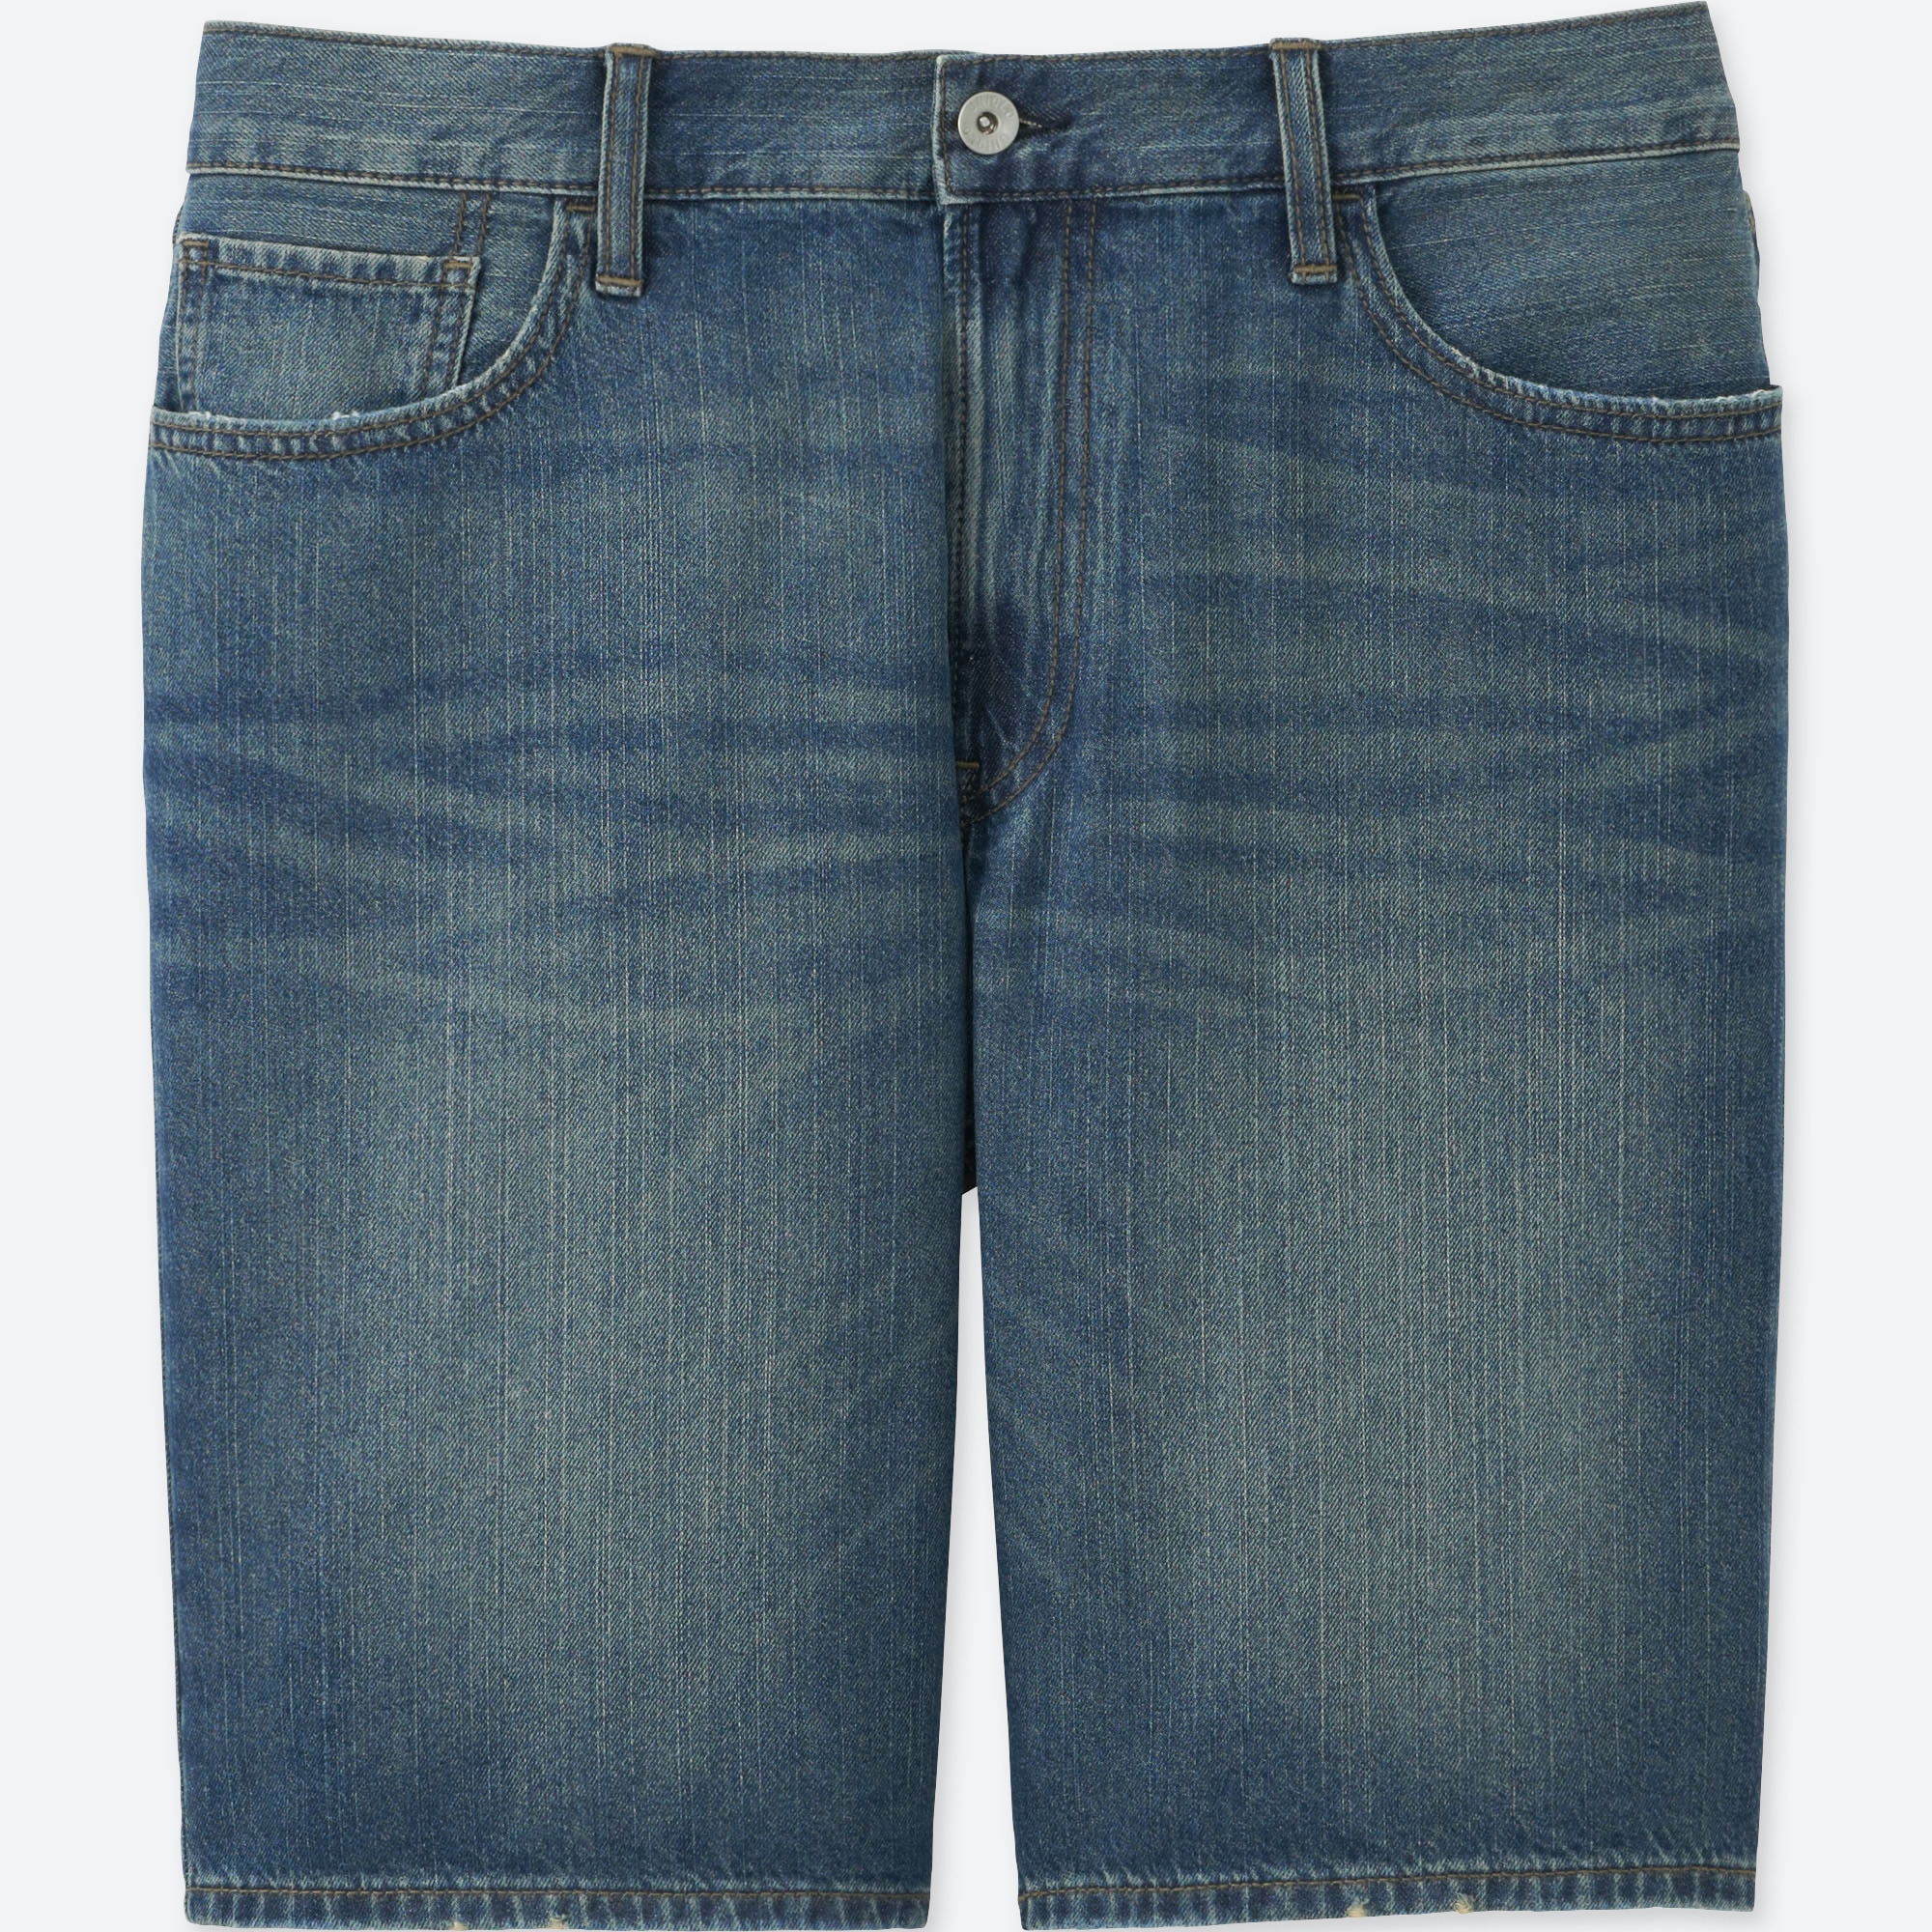 uniqlo cycling jeans